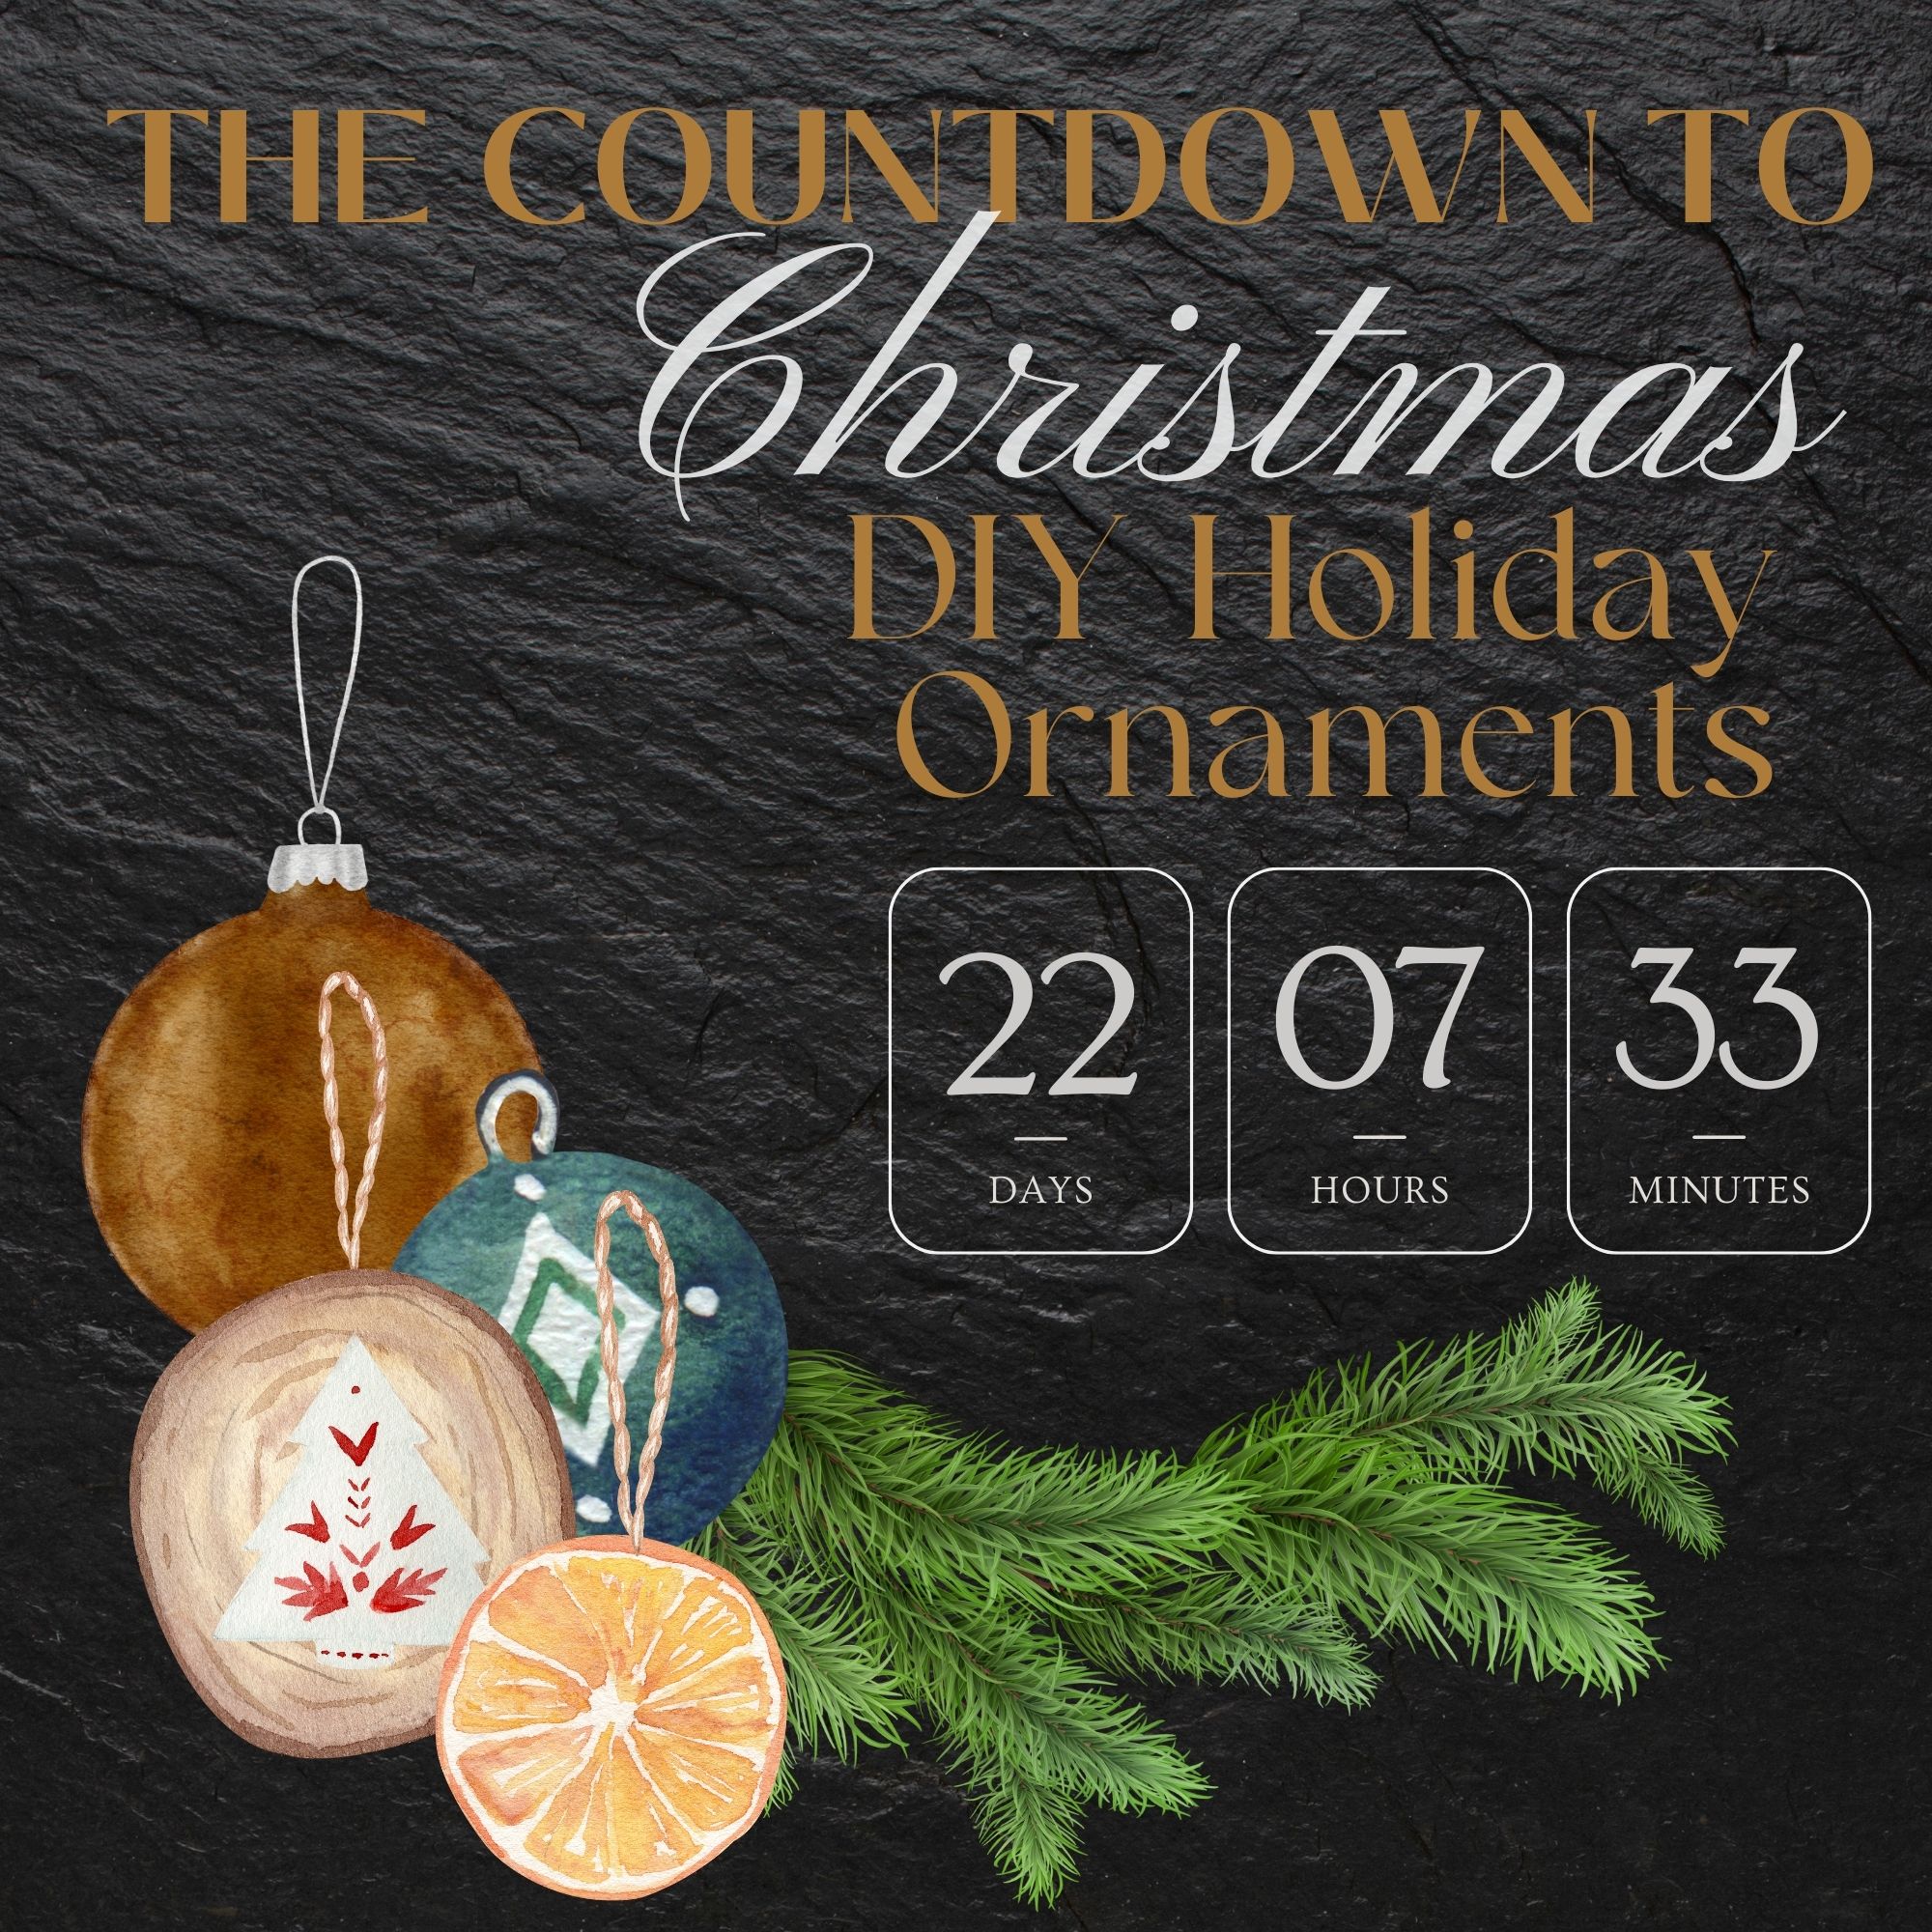 The Countdown To Christmas …an Ornament DIY